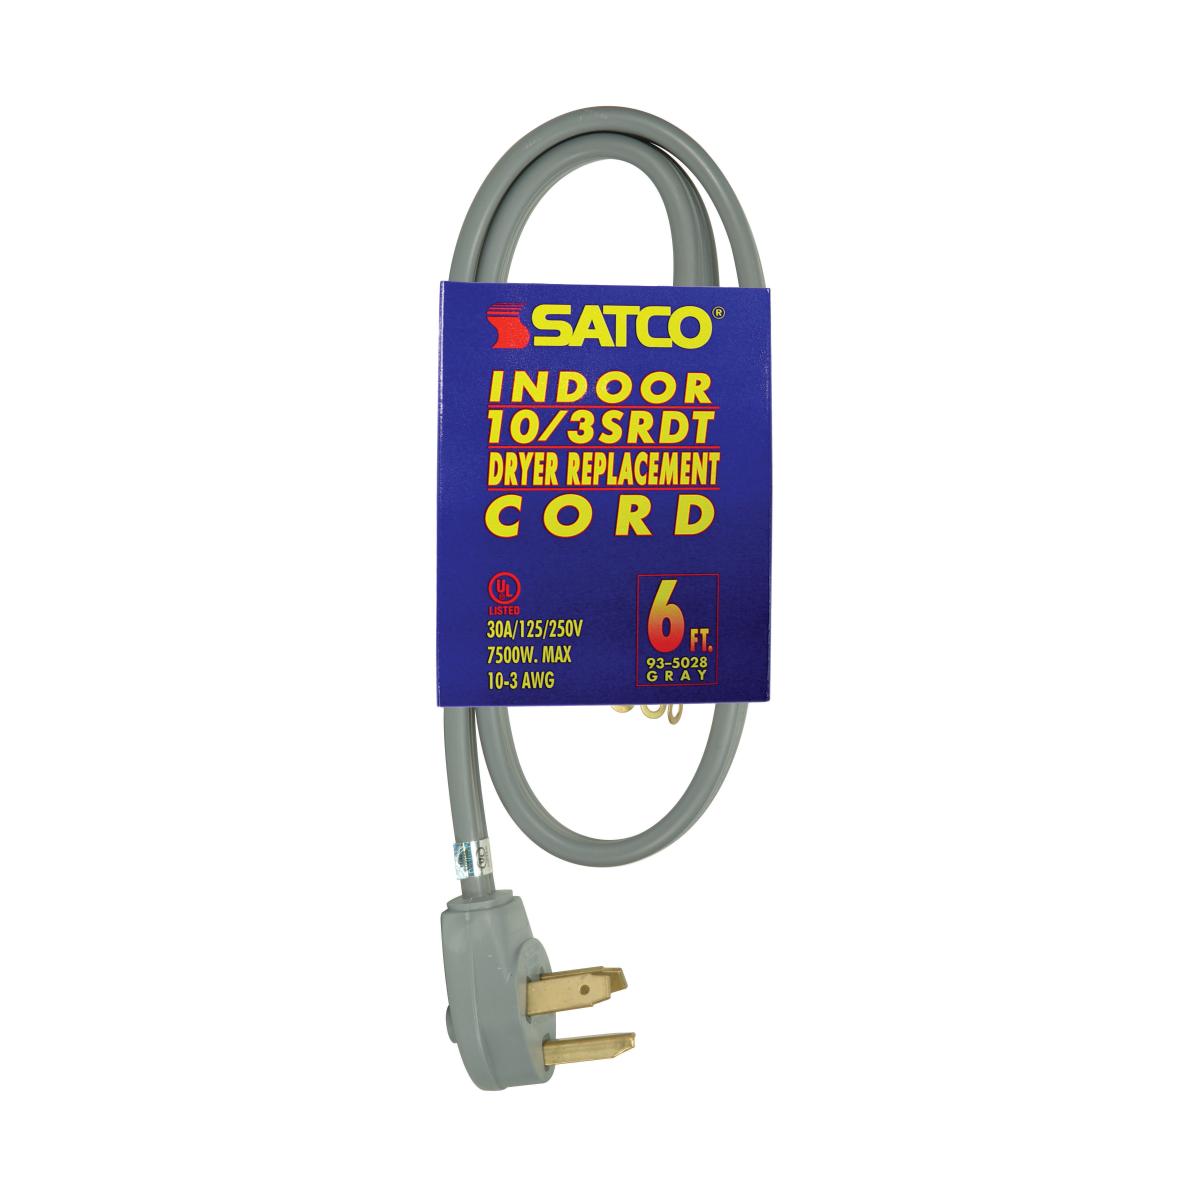 Satco 93-5028 6 Foot, 3 Wire Heavy Duty Replacement Dryer Cord 10-3 SRDT Gray Flat Indoor Use Only 30A/125V-250V 7500W